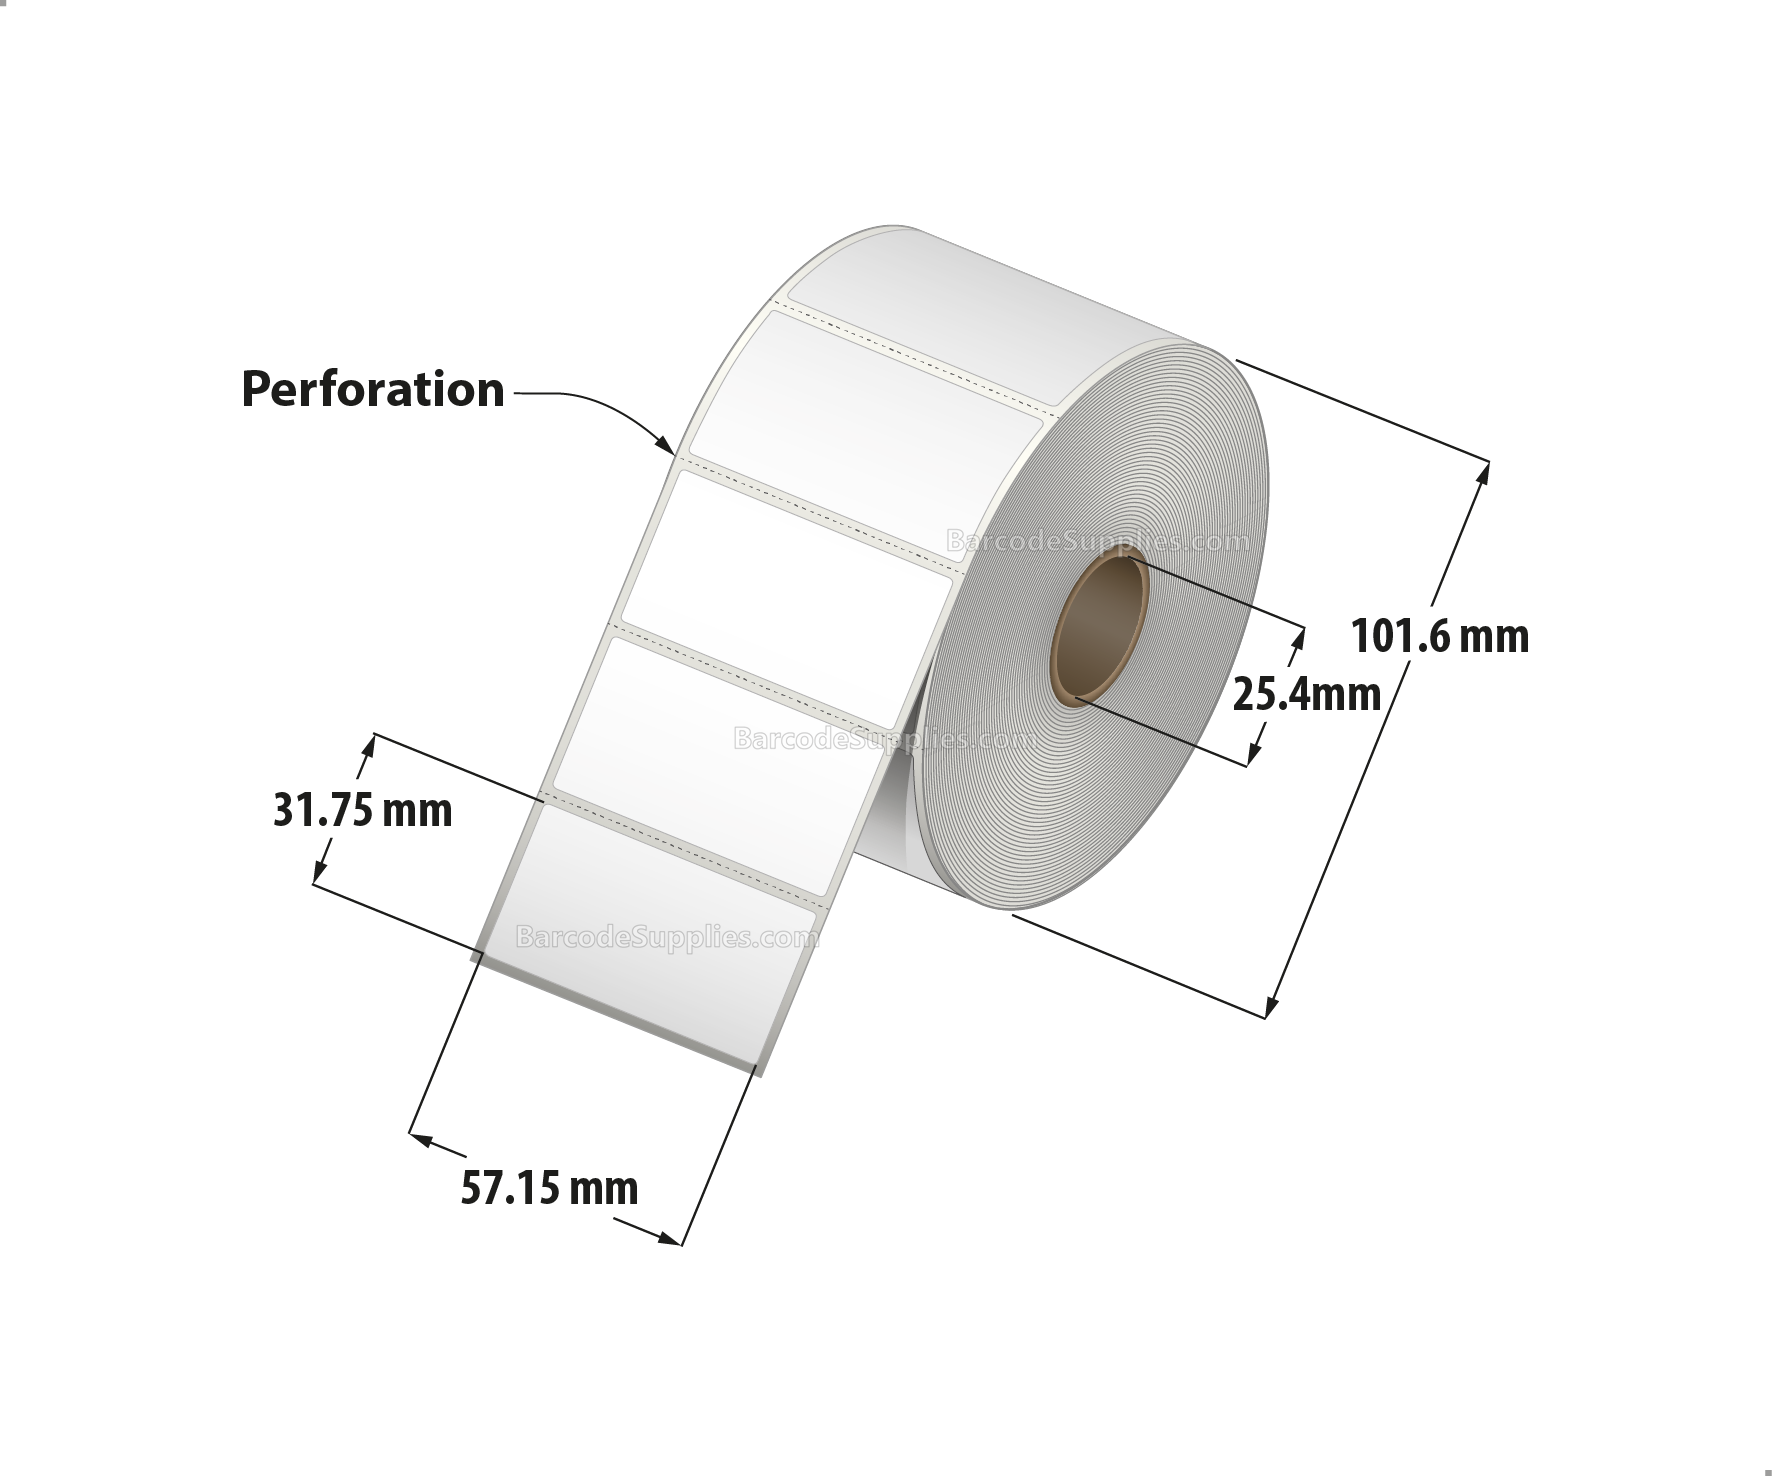 2.25 x 1.25 Thermal Transfer White Labels With Permanent Acrylic Adhesive - Perforated - 1135 Labels Per Roll - Carton Of 4 Rolls - 4540 Labels Total - MPN: TH225125-14PTT